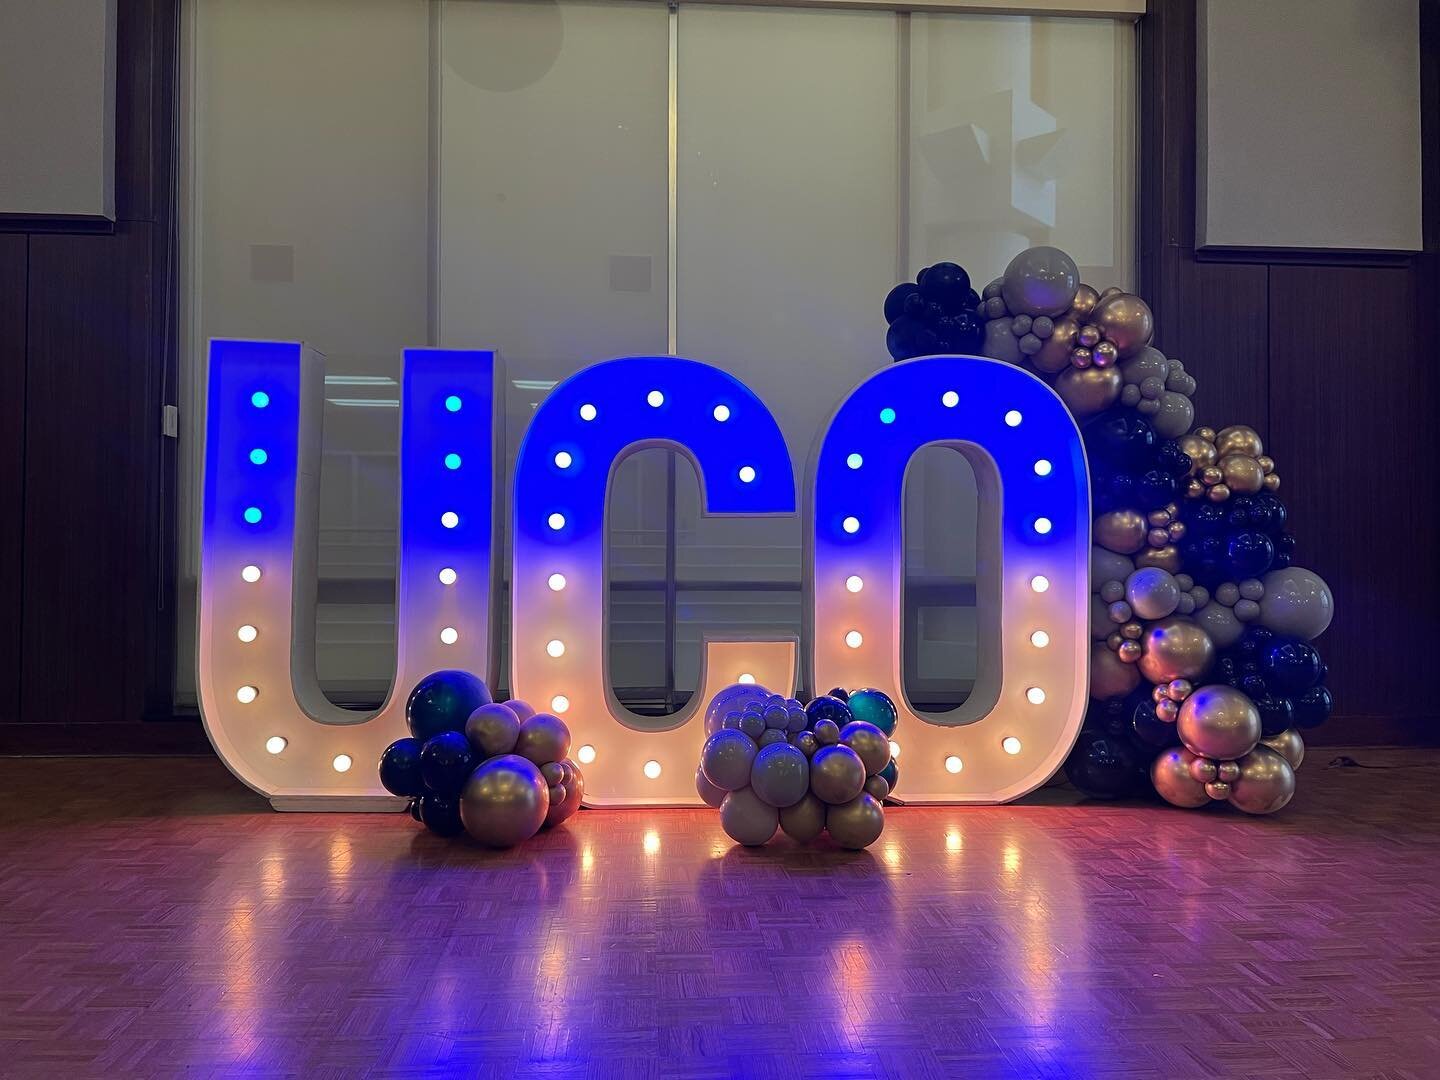 Huge Thank you to UCO for having us out! 

Balloons: @balloonies_okc 

See our website in our bio for your future bookings!